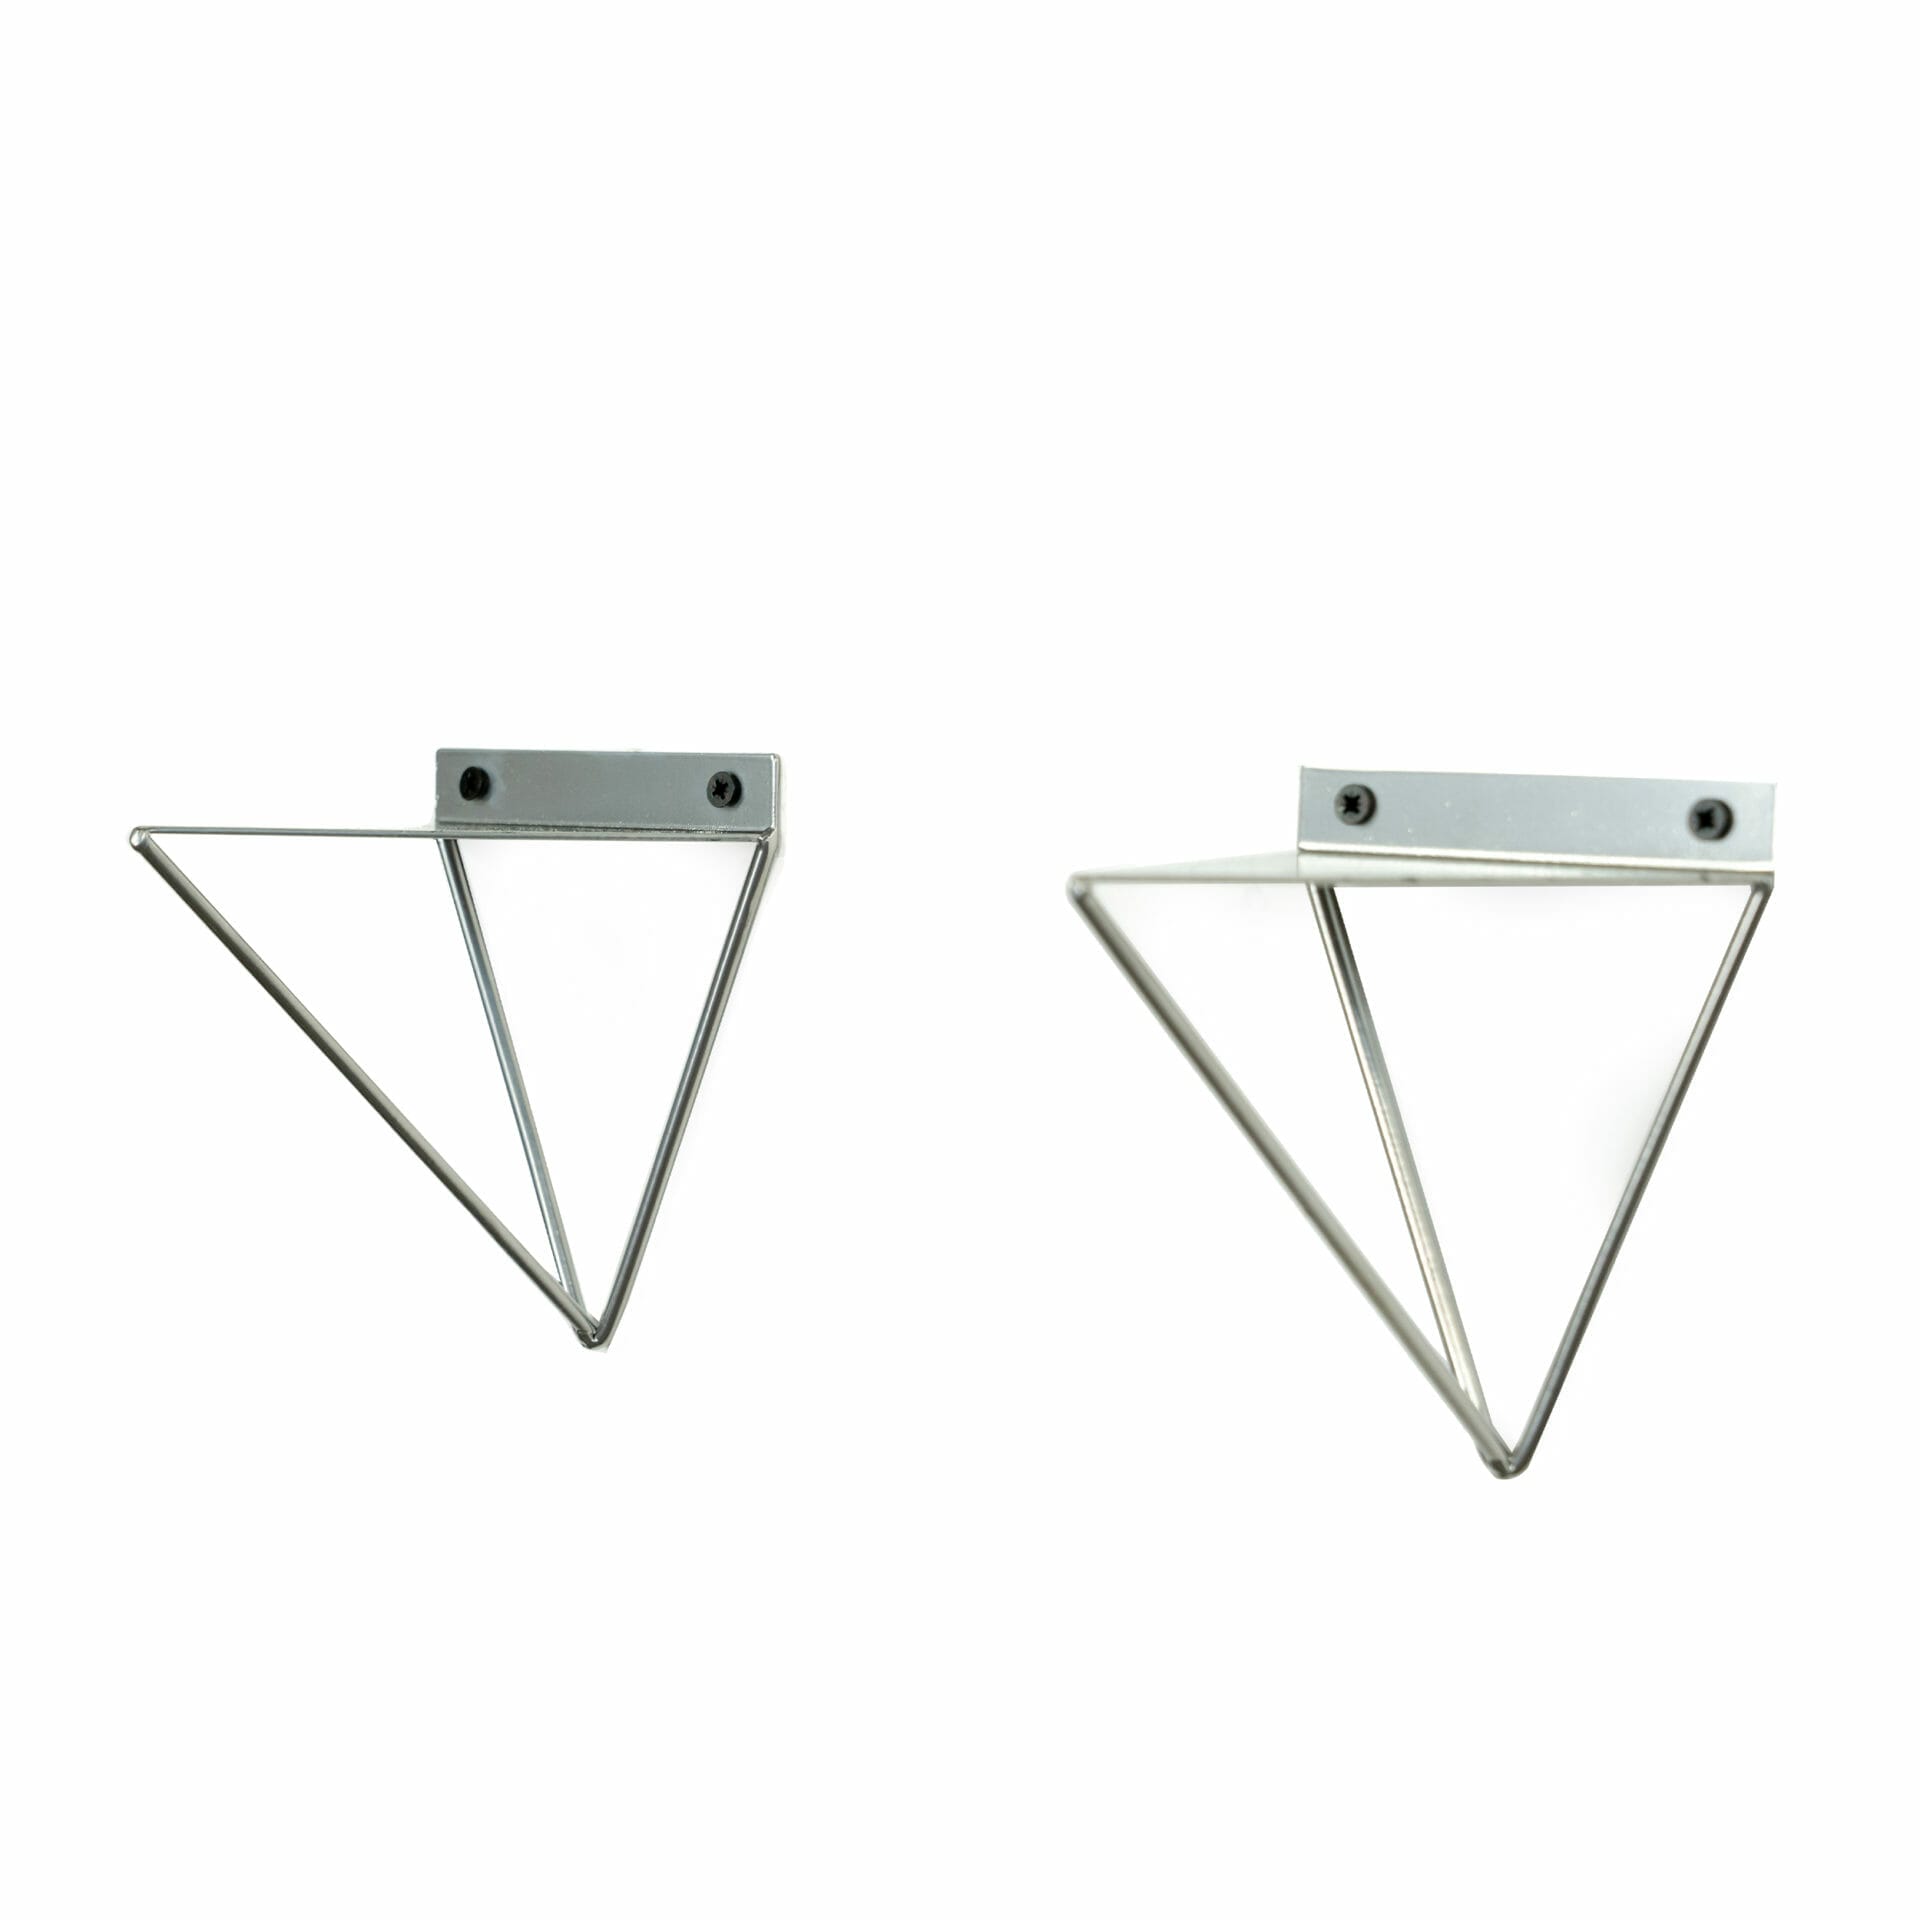 Hairpin shelf brackets pipedreamfurniture industrial style shelving pair angle left silver